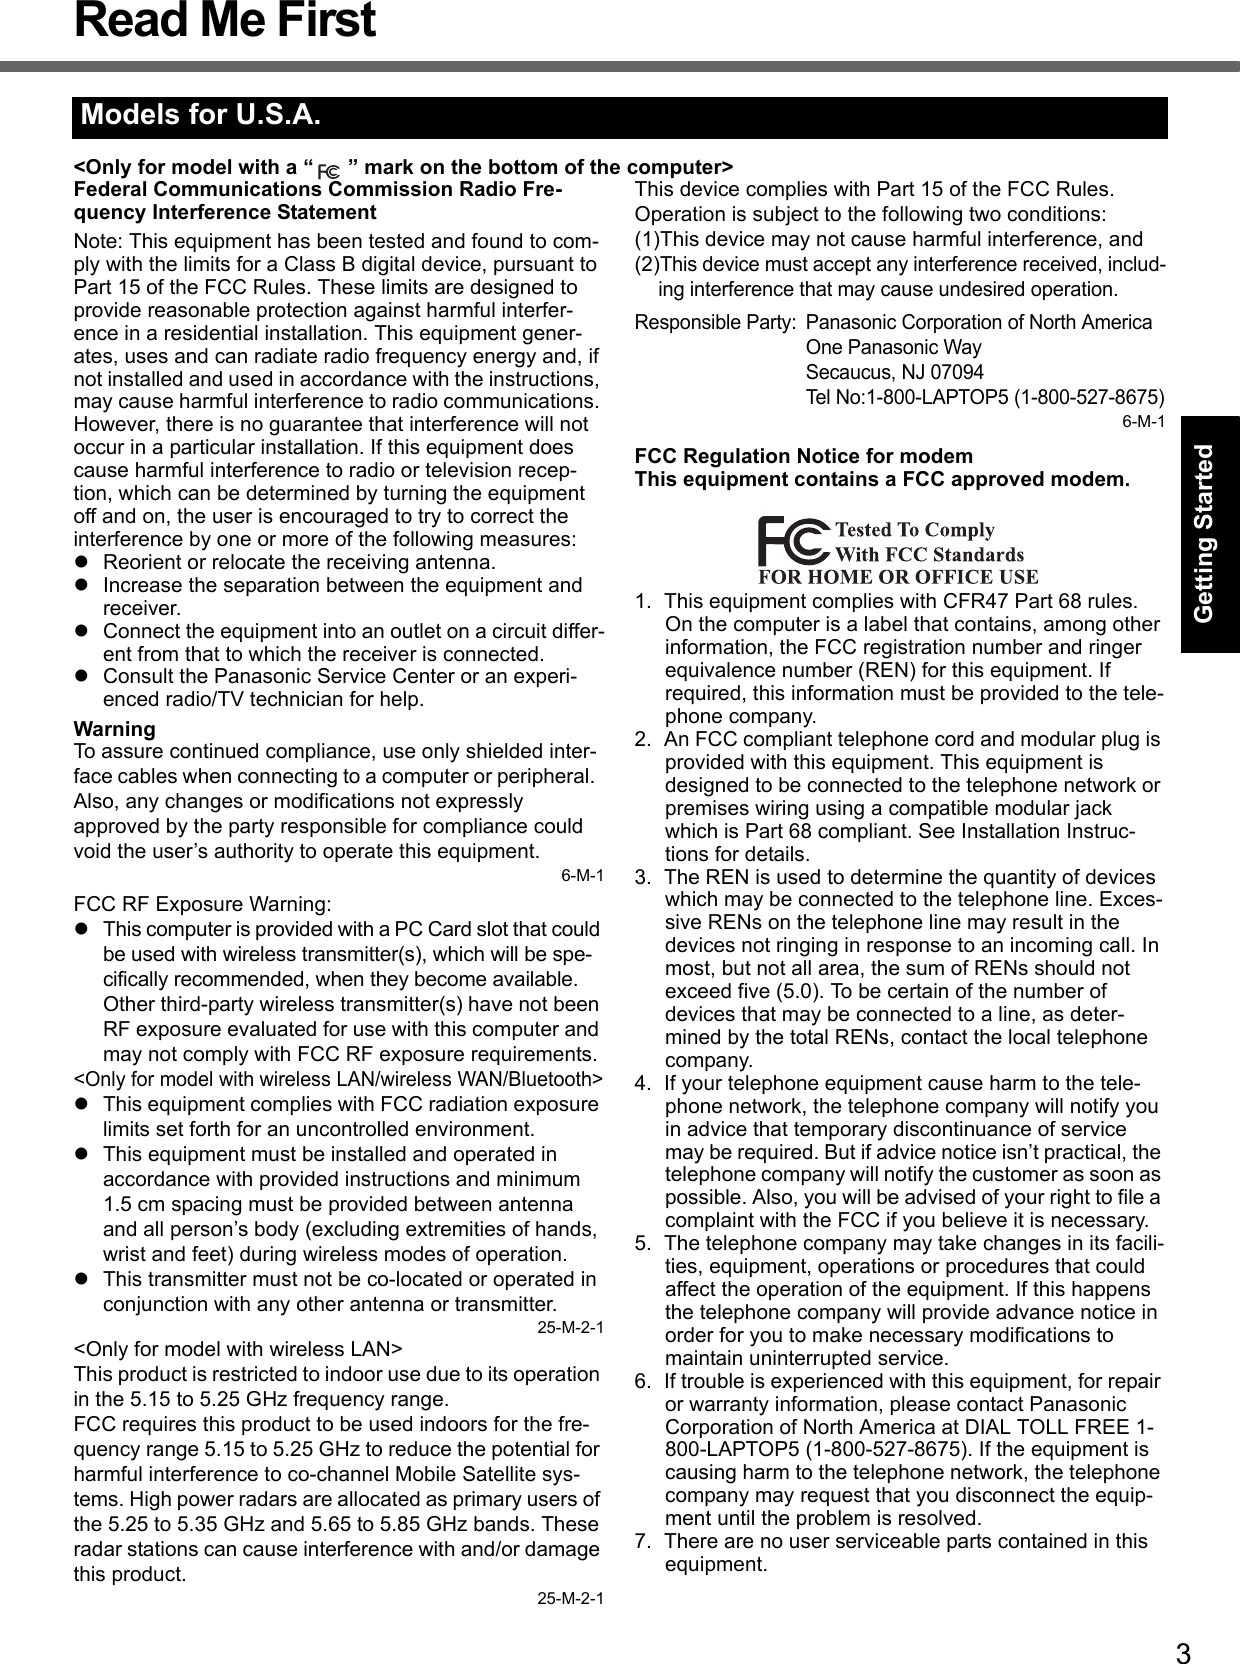 3Getting StartedUseful InformationTroubleshootingAppendixRead Me First&lt;Only for model with a “ ” mark on the bottom of the computer&gt;Federal Communications Commission Radio Fre-quency Interference StatementNote: This equipment has been tested and found to com-ply with the limits for a Class B digital device, pursuant to Part 15 of the FCC Rules. These limits are designed to provide reasonable protection against harmful interfer-ence in a residential installation. This equipment gener-ates, uses and can radiate radio frequency energy and, if not installed and used in accordance with the instructions, may cause harmful interference to radio communications. However, there is no guarantee that interference will not occur in a particular installation. If this equipment does cause harmful interference to radio or television recep-tion, which can be determined by turning the equipment off and on, the user is encouraged to try to correct the interference by one or more of the following measures:Reorient or relocate the receiving antenna.Increase the separation between the equipment and receiver.Connect the equipment into an outlet on a circuit differ-ent from that to which the receiver is connected.Consult the Panasonic Service Center or an experi-enced radio/TV technician for help.WarningTo assure continued compliance, use only shielded inter-face cables when connecting to a computer or peripheral.  Also, any changes or modifications not expressly approved by the party responsible for compliance could void the user’s authority to operate this equipment.6-M-1FCC RF Exposure Warning:This computer is provided with a PC Card slot that could be used with wireless transmitter(s), which will be spe-cifically recommended, when they become available.Other third-party wireless transmitter(s) have not been RF exposure evaluated for use with this computer and may not comply with FCC RF exposure requirements.&lt;Only for model with wireless LAN/wireless WAN/Bluetooth&gt;This equipment complies with FCC radiation exposure limits set forth for an uncontrolled environment.This equipment must be installed and operated in accordance with provided instructions and minimum 1.5 cm spacing must be provided between antenna and all person’s body (excluding extremities of hands, wrist and feet) during wireless modes of operation.This transmitter must not be co-located or operated in conjunction with any other antenna or transmitter.25-M-2-1&lt;Only for model with wireless LAN&gt;This product is restricted to indoor use due to its operation in the 5.15 to 5.25 GHz frequency range.FCC requires this product to be used indoors for the fre-quency range 5.15 to 5.25 GHz to reduce the potential for harmful interference to co-channel Mobile Satellite sys-tems. High power radars are allocated as primary users of the 5.25 to 5.35 GHz and 5.65 to 5.85 GHz bands. These radar stations can cause interference with and/or damage this product.25-M-2-1This device complies with Part 15 of the FCC Rules.  Operation is subject to the following two conditions:(1)This device may not cause harmful interference, and(2)This device must accept any interference received, includ-ing interference that may cause undesired operation.Responsible Party: Panasonic Corporation of North AmericaOne Panasonic WaySecaucus, NJ 07094Tel No:1-800-LAPTOP5 (1-800-527-8675)6-M-1FCC Regulation Notice for modemThis equipment contains a FCC approved modem.1. This equipment complies with CFR47 Part 68 rules. On the computer is a label that contains, among other information, the FCC registration number and ringer equivalence number (REN) for this equipment. If required, this information must be provided to the tele-phone company.2. An FCC compliant telephone cord and modular plug is provided with this equipment. This equipment is designed to be connected to the telephone network or premises wiring using a compatible modular jack which is Part 68 compliant. See Installation Instruc-tions for details.3. The REN is used to determine the quantity of devices which may be connected to the telephone line. Exces-sive RENs on the telephone line may result in the devices not ringing in response to an incoming call. In most, but not all area, the sum of RENs should not exceed five (5.0). To be certain of the number of devices that may be connected to a line, as deter-mined by the total RENs, contact the local telephone company.4. If your telephone equipment cause harm to the tele-phone network, the telephone company will notify you in advice that temporary discontinuance of service may be required. But if advice notice isn’t practical, the telephone company will notify the customer as soon as possible. Also, you will be advised of your right to file a complaint with the FCC if you believe it is necessary.5. The telephone company may take changes in its facili-ties, equipment, operations or procedures that could affect the operation of the equipment. If this happens the telephone company will provide advance notice in order for you to make necessary modifications to maintain uninterrupted service.6. If trouble is experienced with this equipment, for repair or warranty information, please contact Panasonic Corporation of North America at DIAL TOLL FREE 1-800-LAPTOP5 (1-800-527-8675). If the equipment is causing harm to the telephone network, the telephone company may request that you disconnect the equip-ment until the problem is resolved.7. There are no user serviceable parts contained in this equipment.Models for U.S.A.